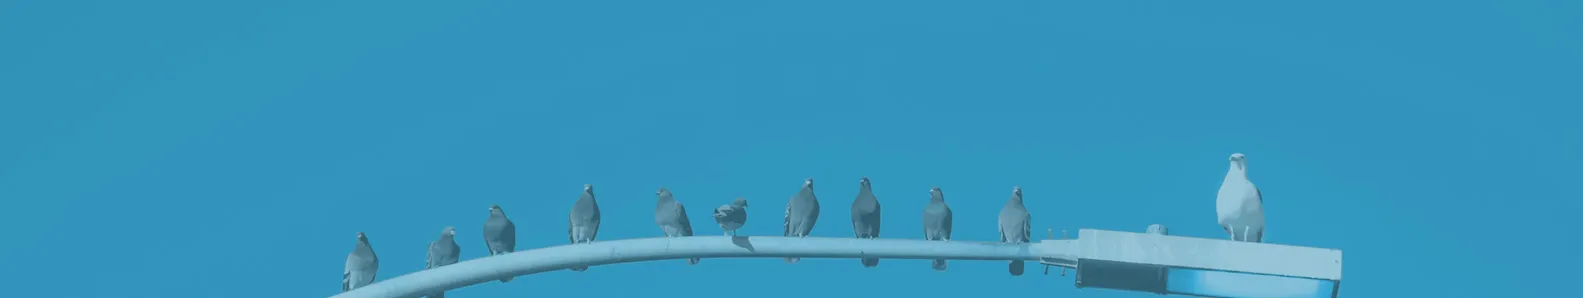 Social Sciences picture of pigeons in a row along a horizontal light poll with lightblue background